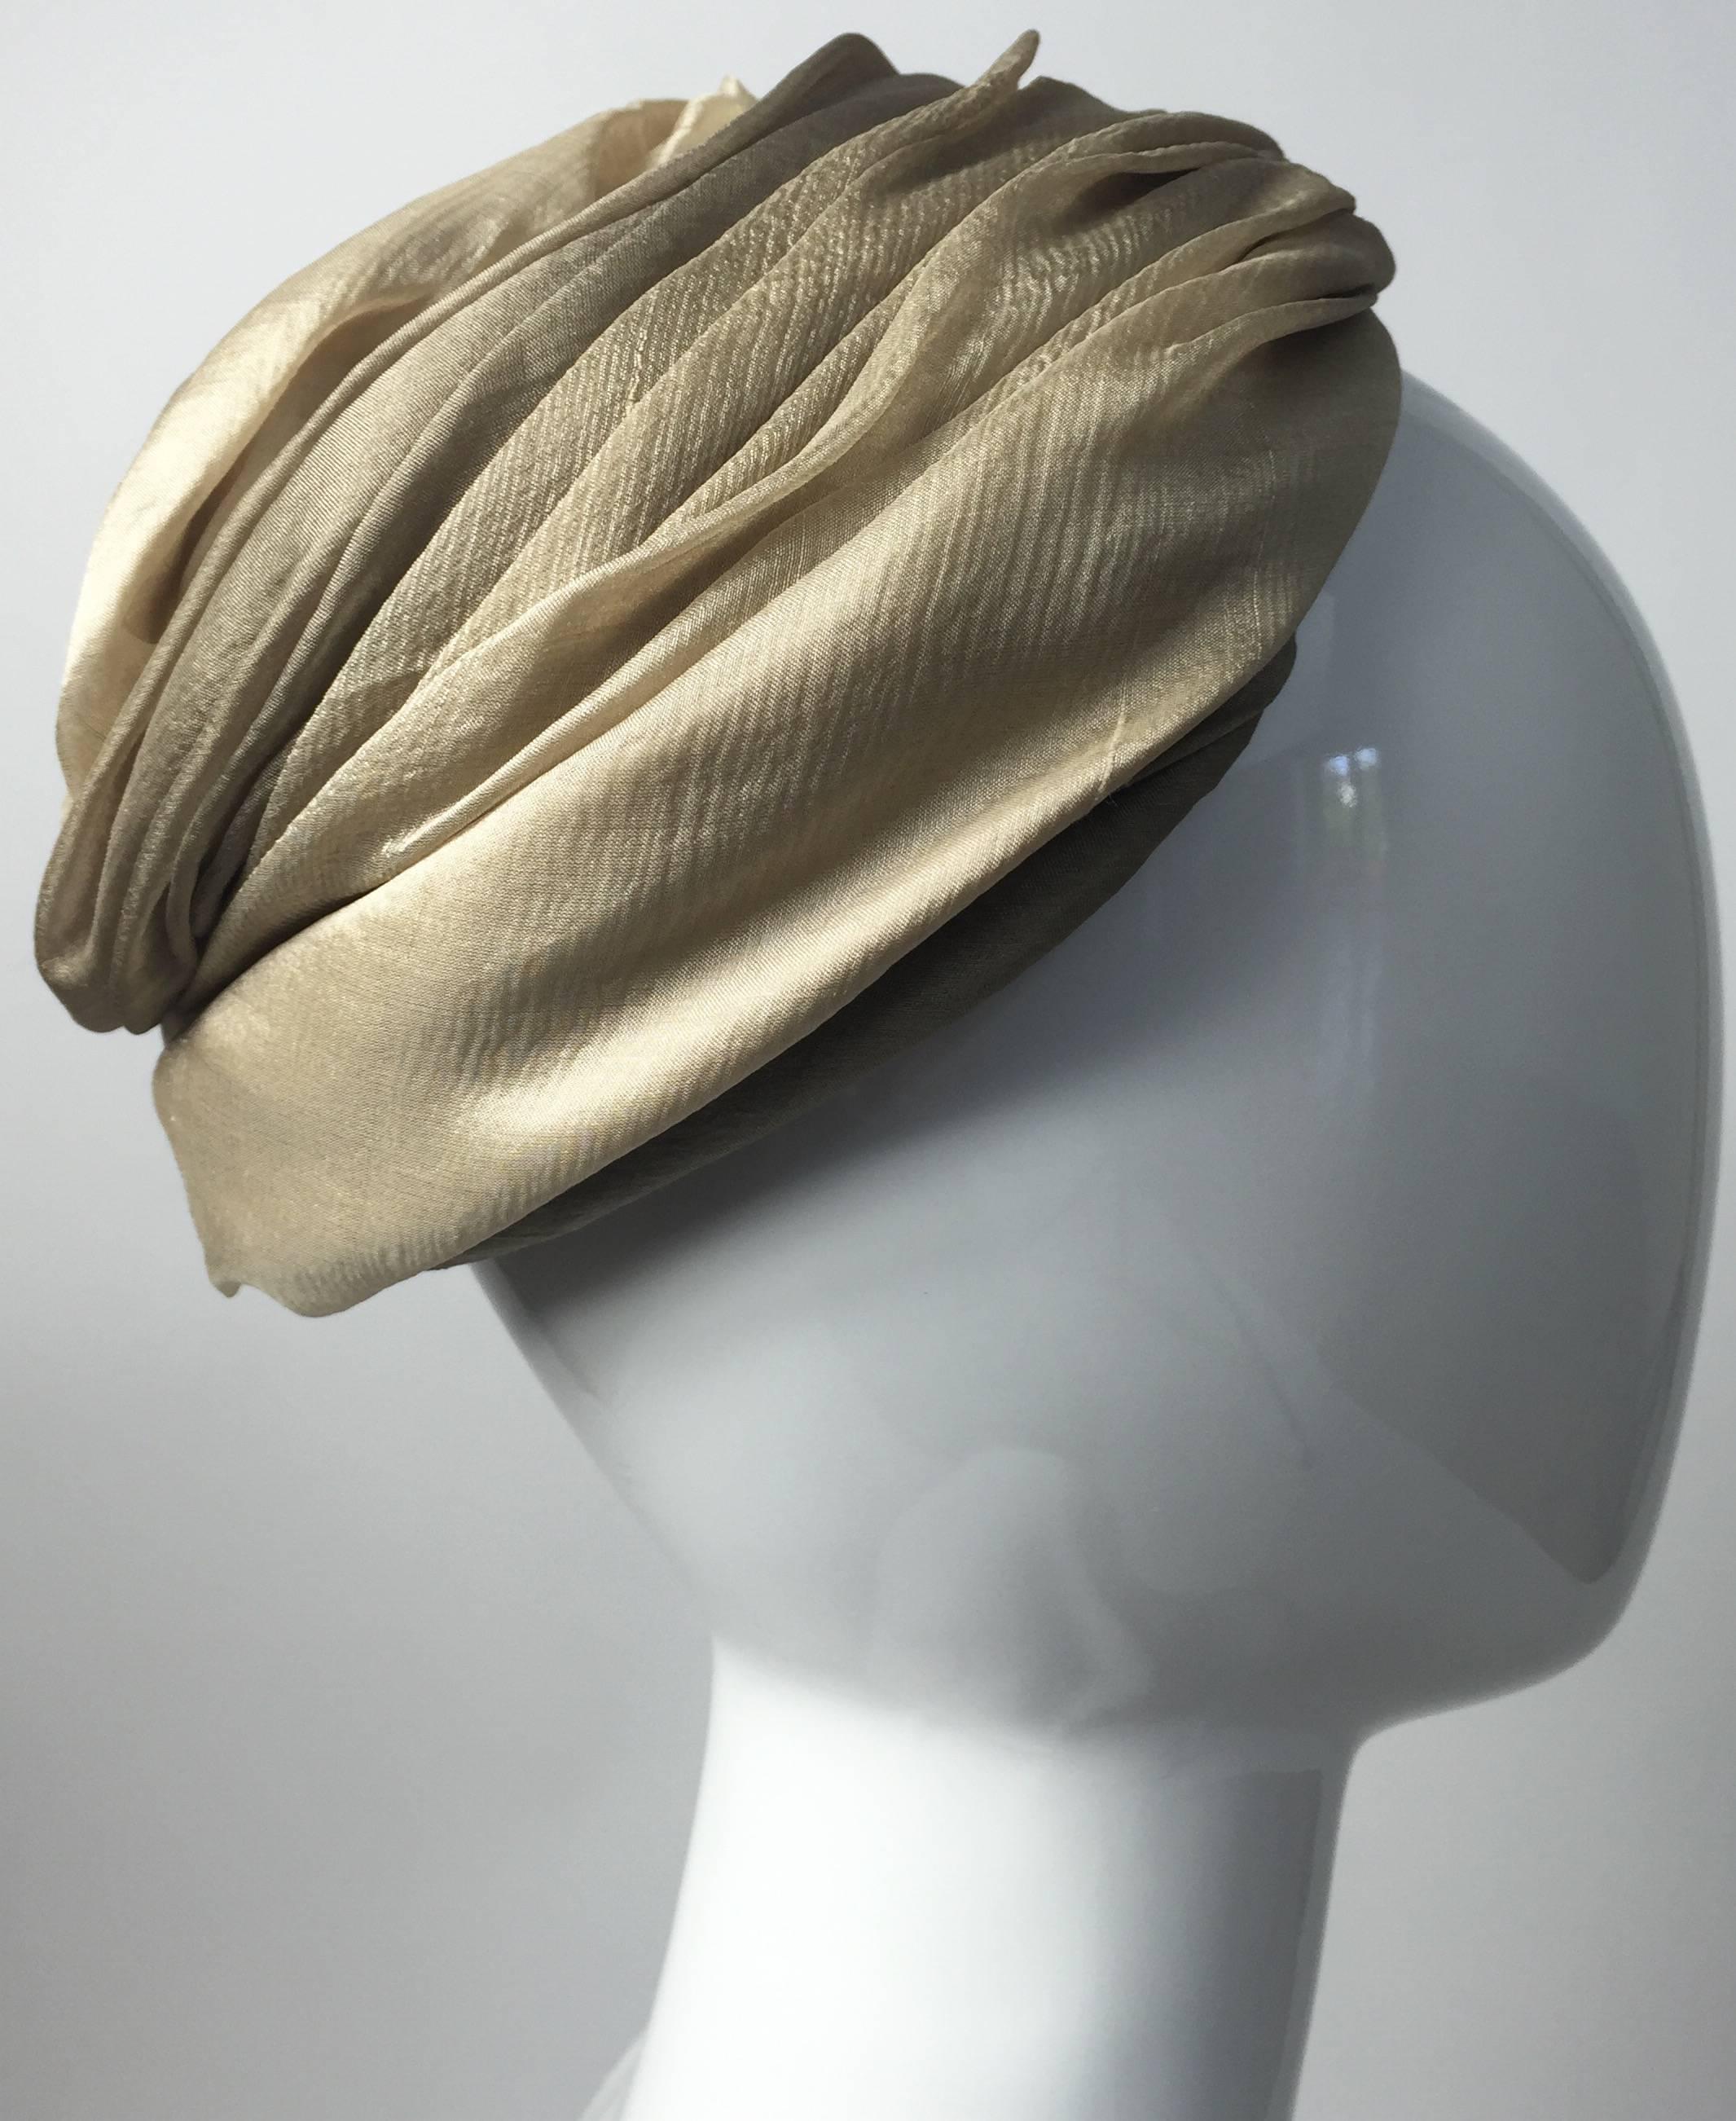 An exquisite early 1950s Christian Dior turban hat. Done in a soft silk chiffon in shades of taupe, beige, and light golden ivory. The fabric is gently draped and pleated. Hand finished. Lined with a netting
In excellent condition
Measurements: